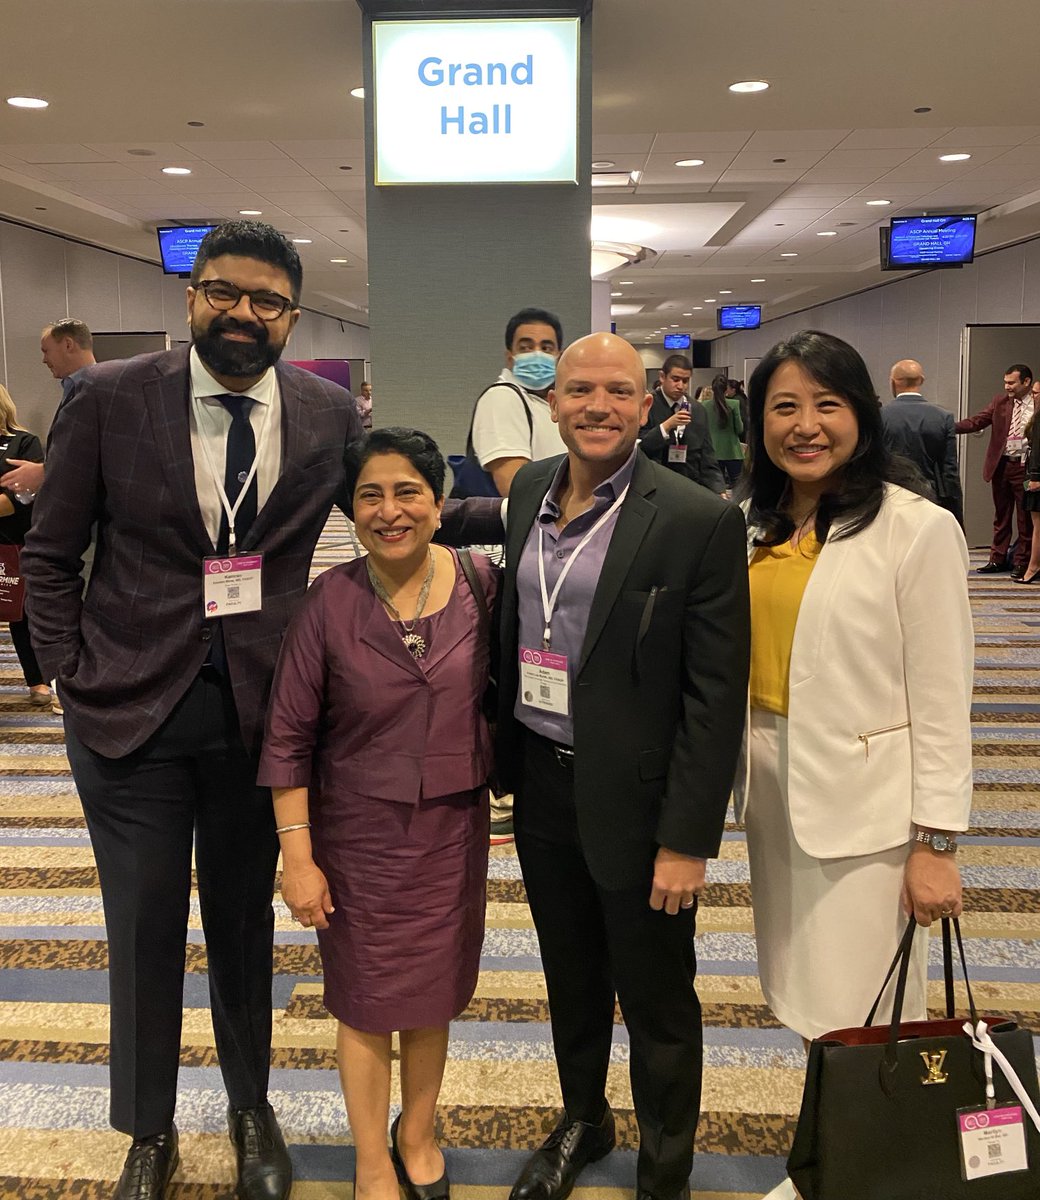 Done with my 2 presentations and I can now relax and enjoy the company of great friends. ⁦@KMirza⁩ ⁦@NayarRitu⁩ ⁦@ALBoothMD⁩ ⁦@ASCP_Chicago⁩ #ASCP2022 #ASCP100